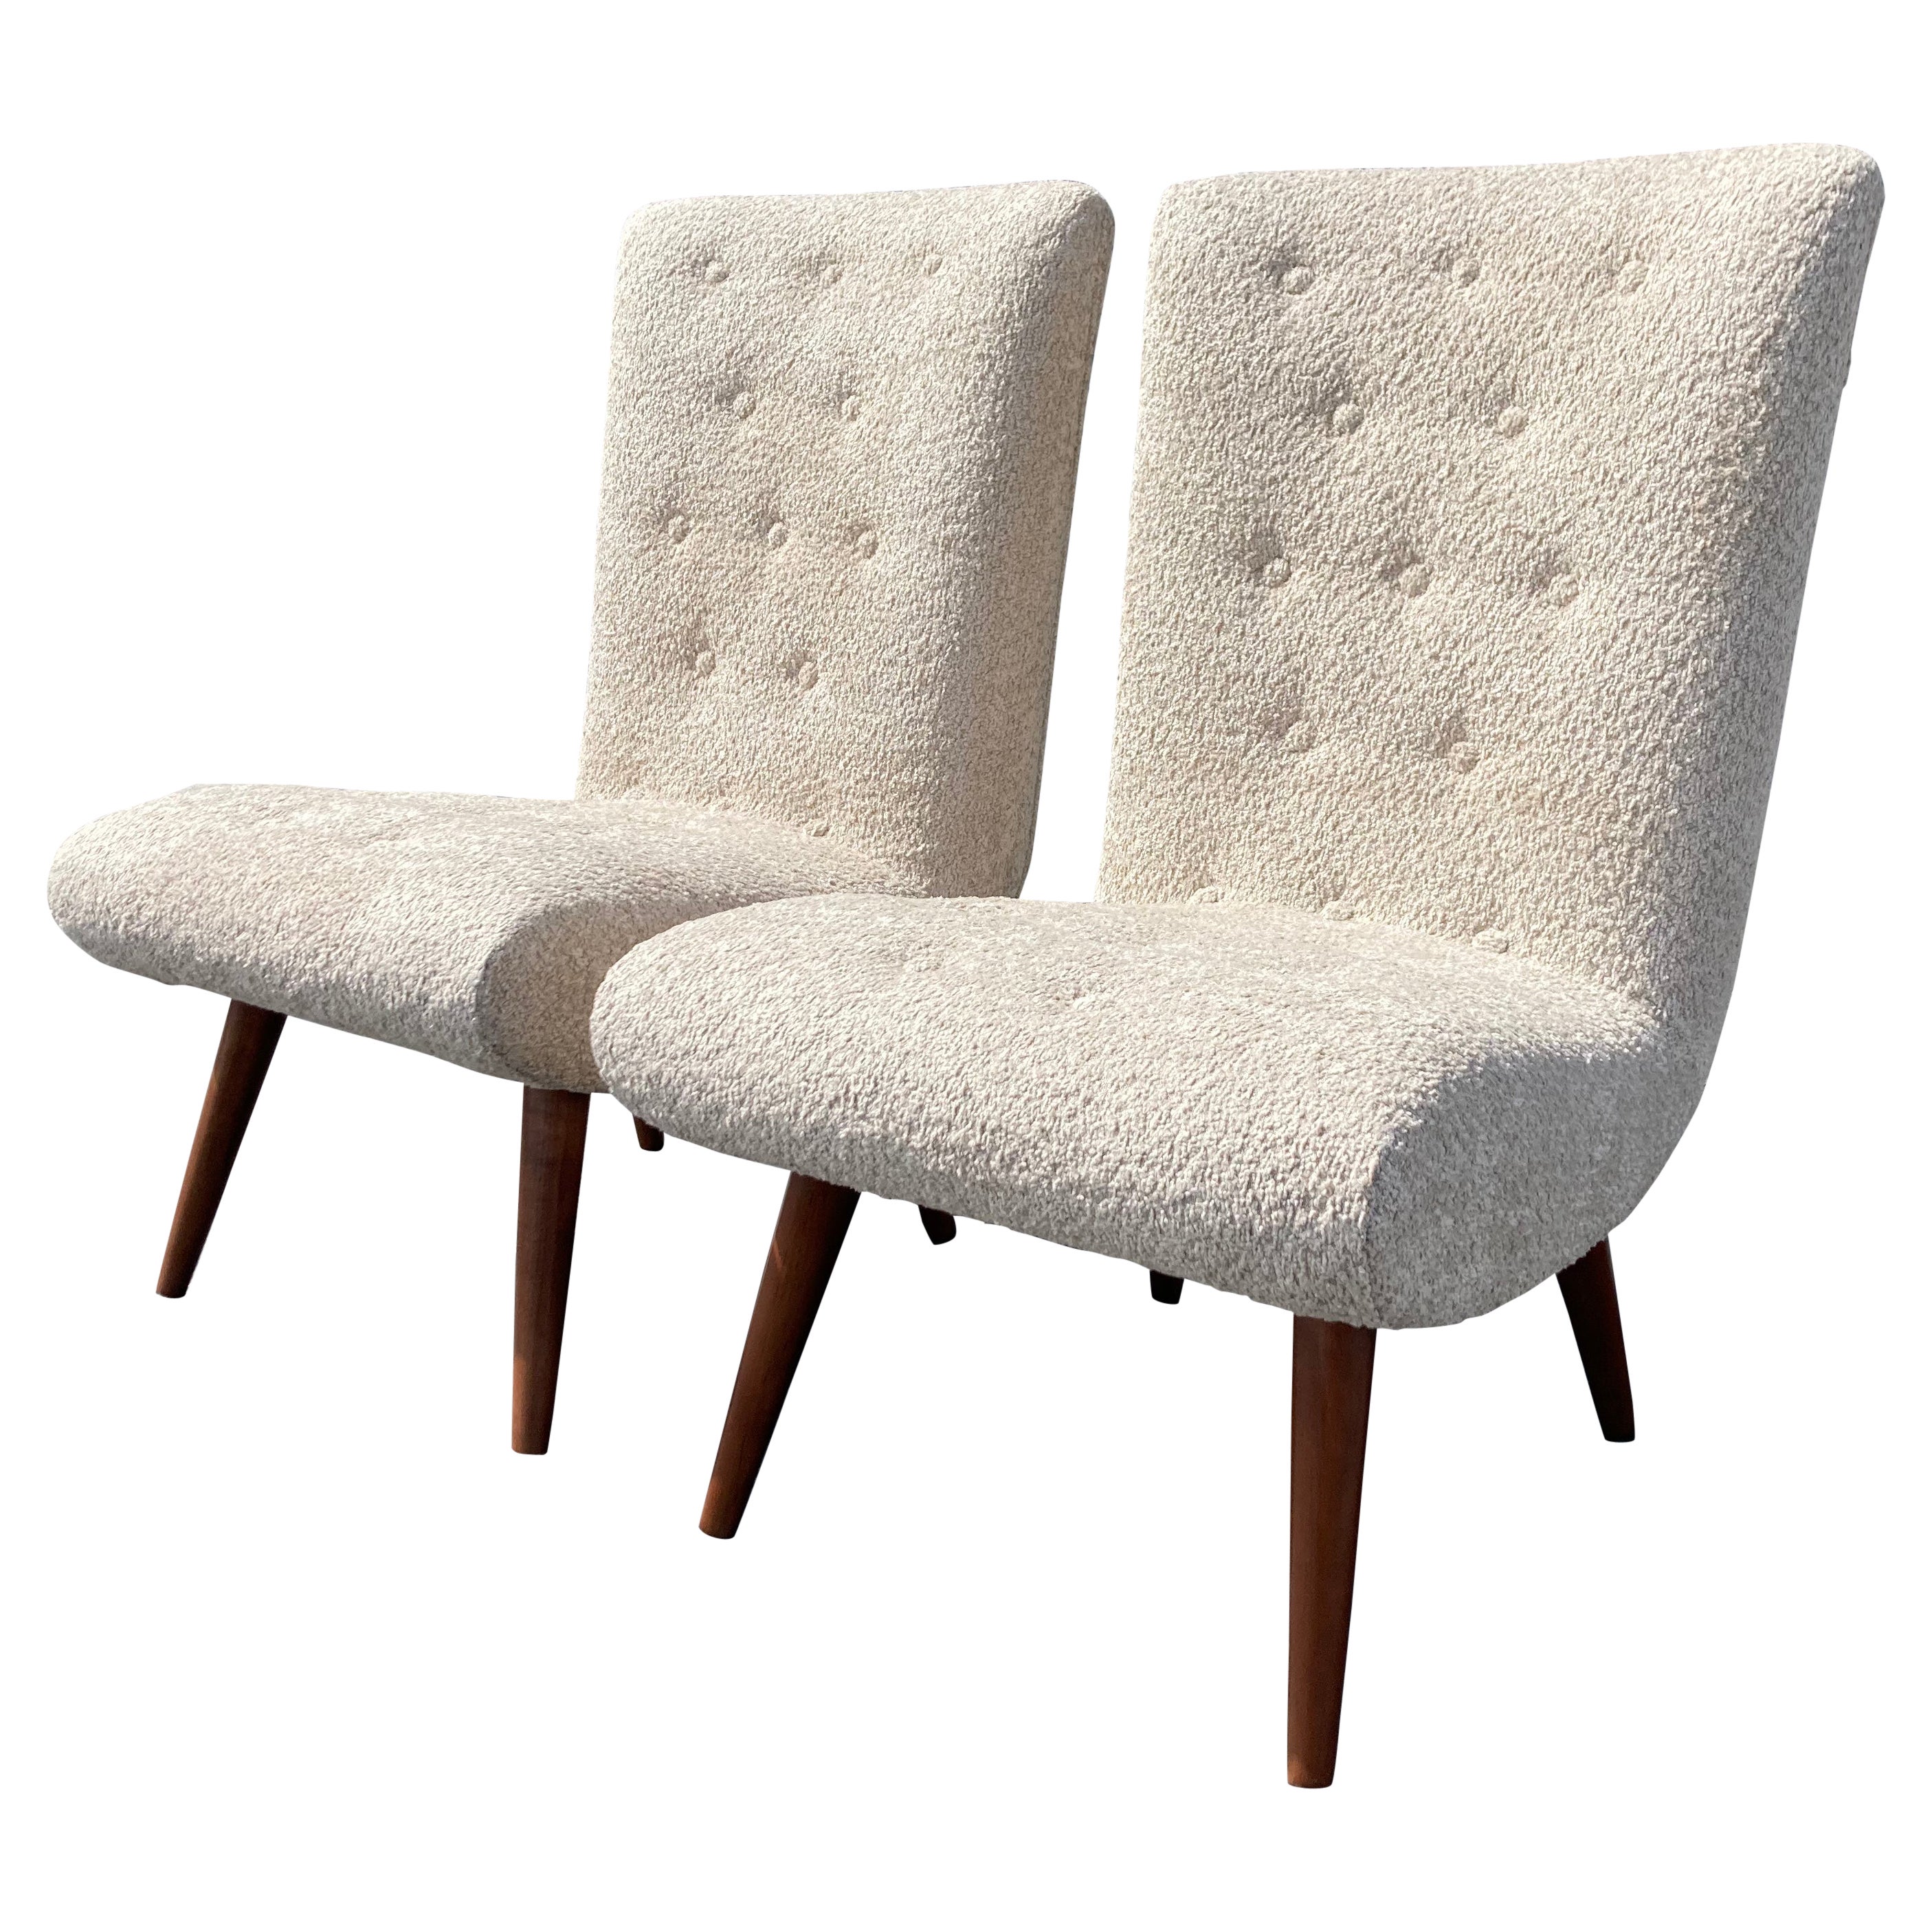 Pair of Midcentury Lounge Chairs, Bouclé Fabric